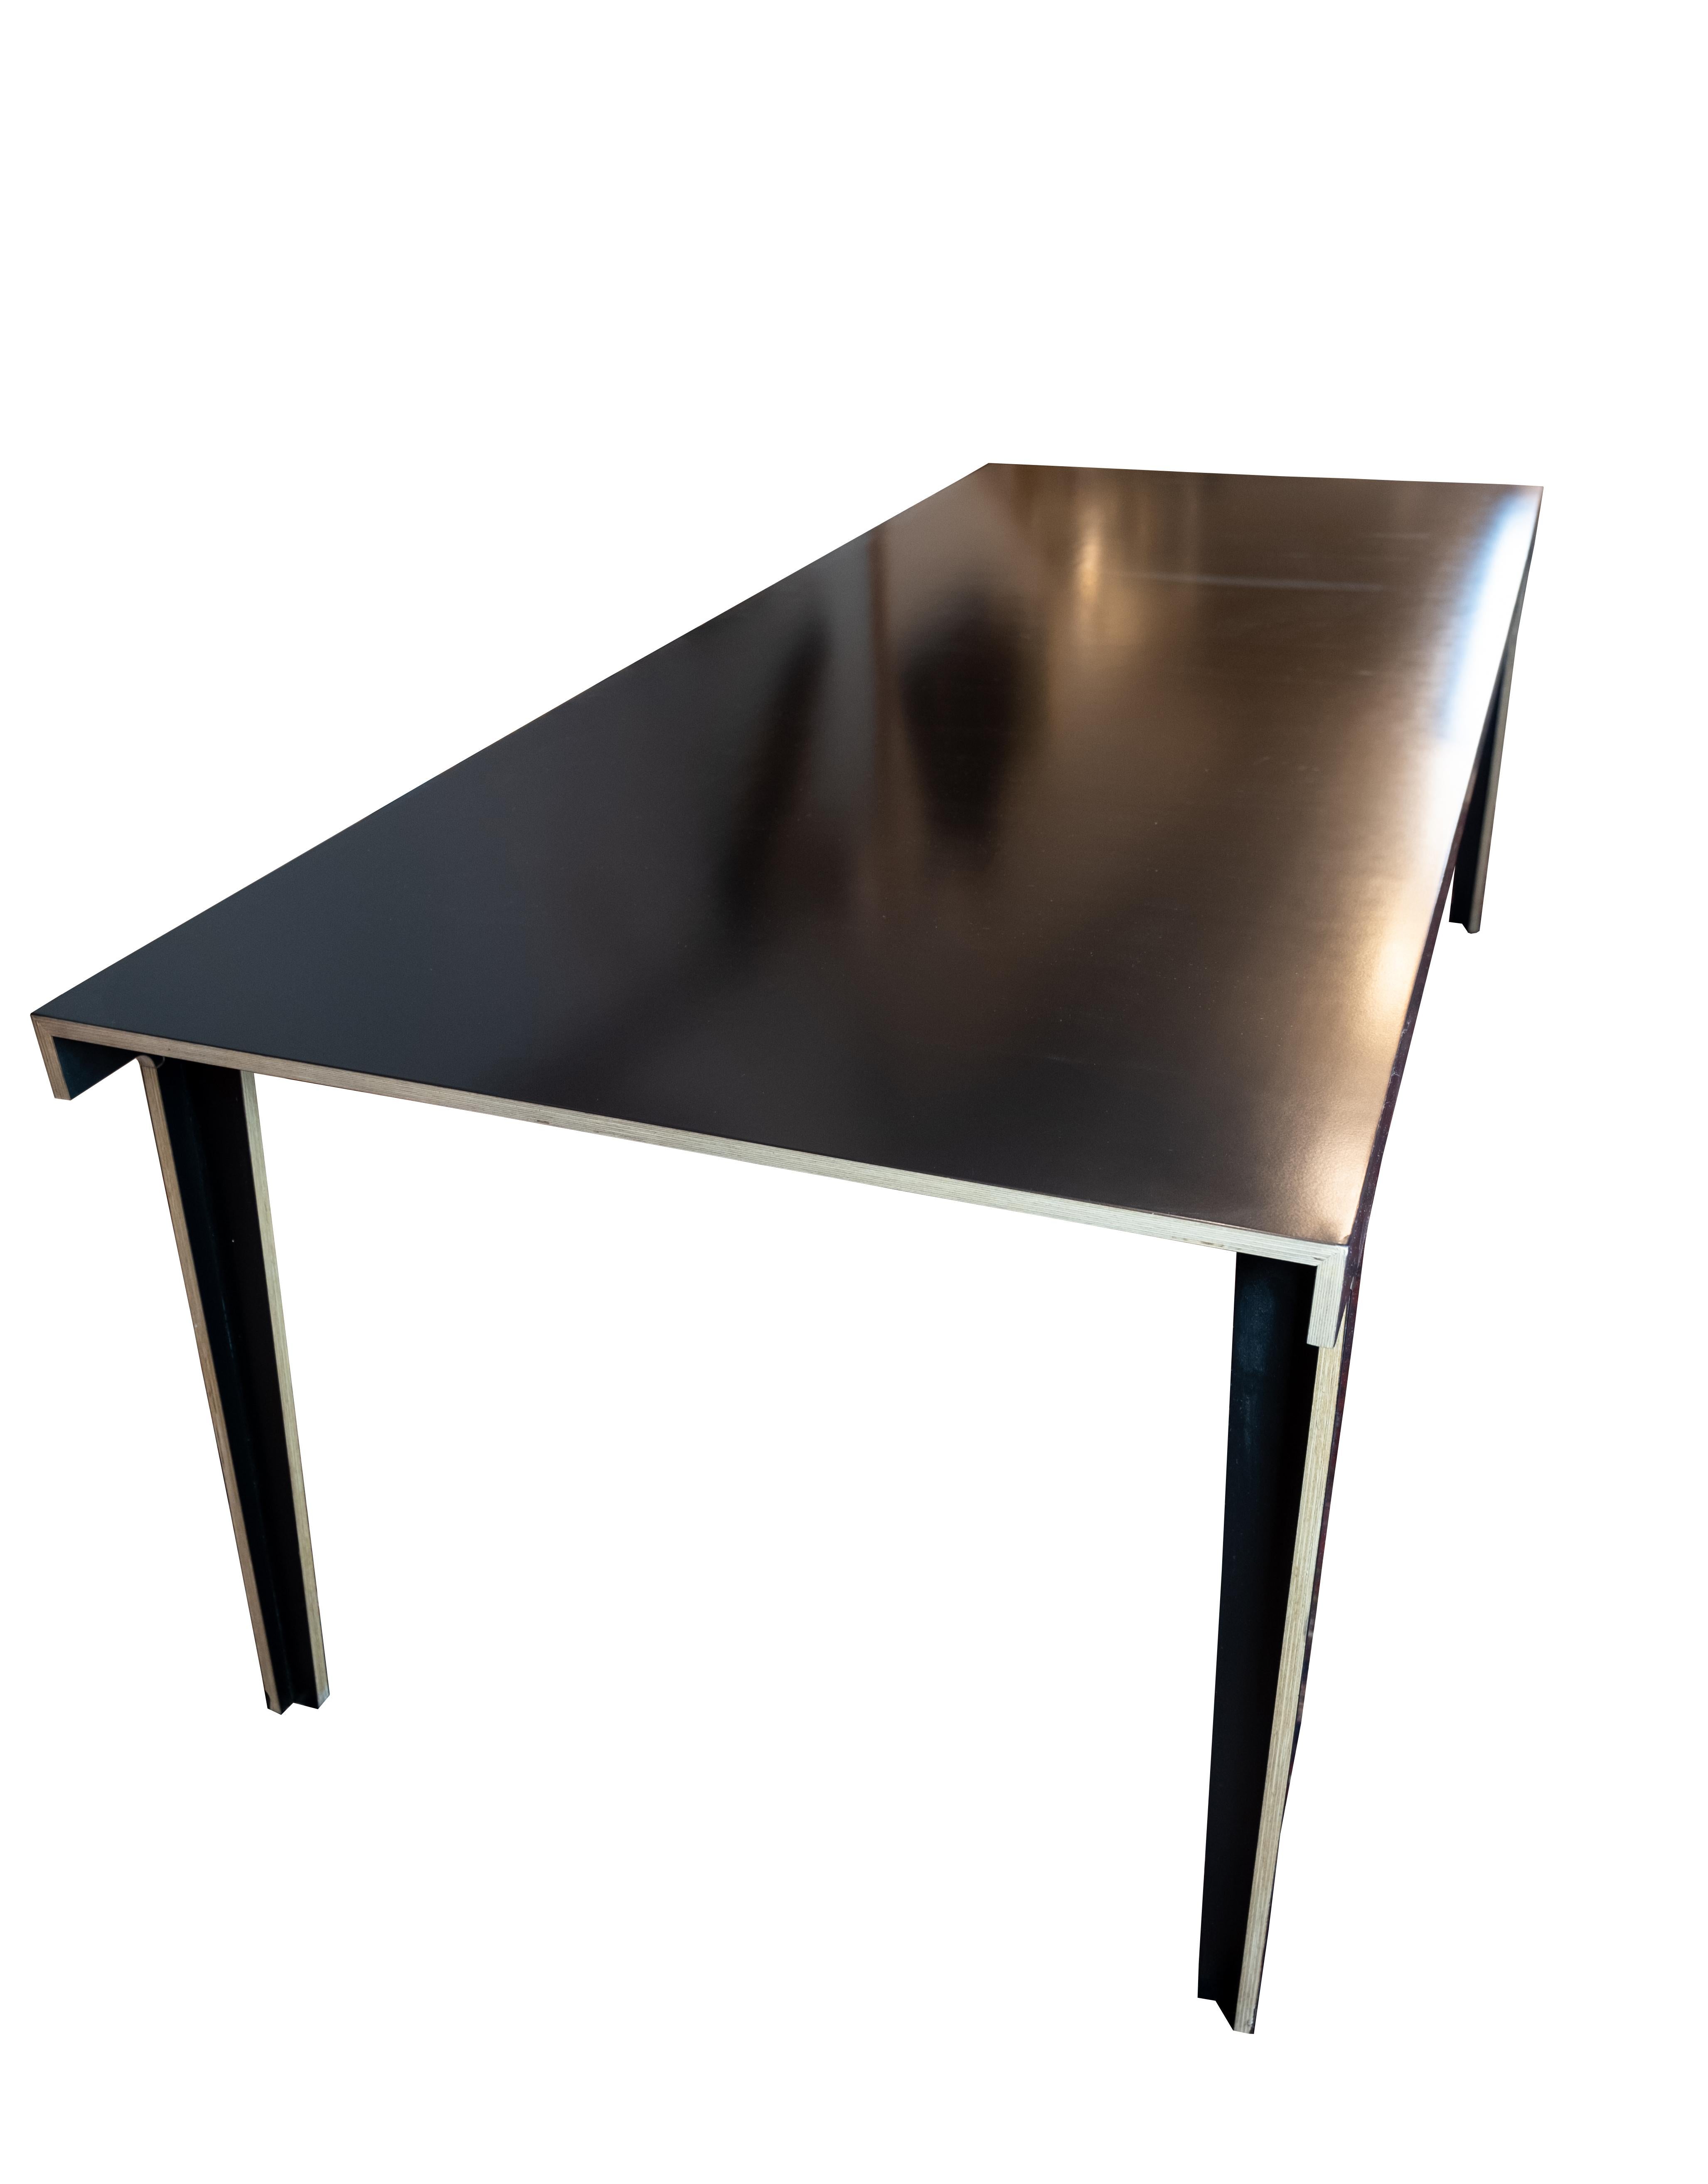 The Dining Table, model M5, embodies the contemporary elegance and innovative design associated with Established & Sons, a prominent design company known for pushing the boundaries of creativity and craftsmanship.

Designed by Frank in 2006, this